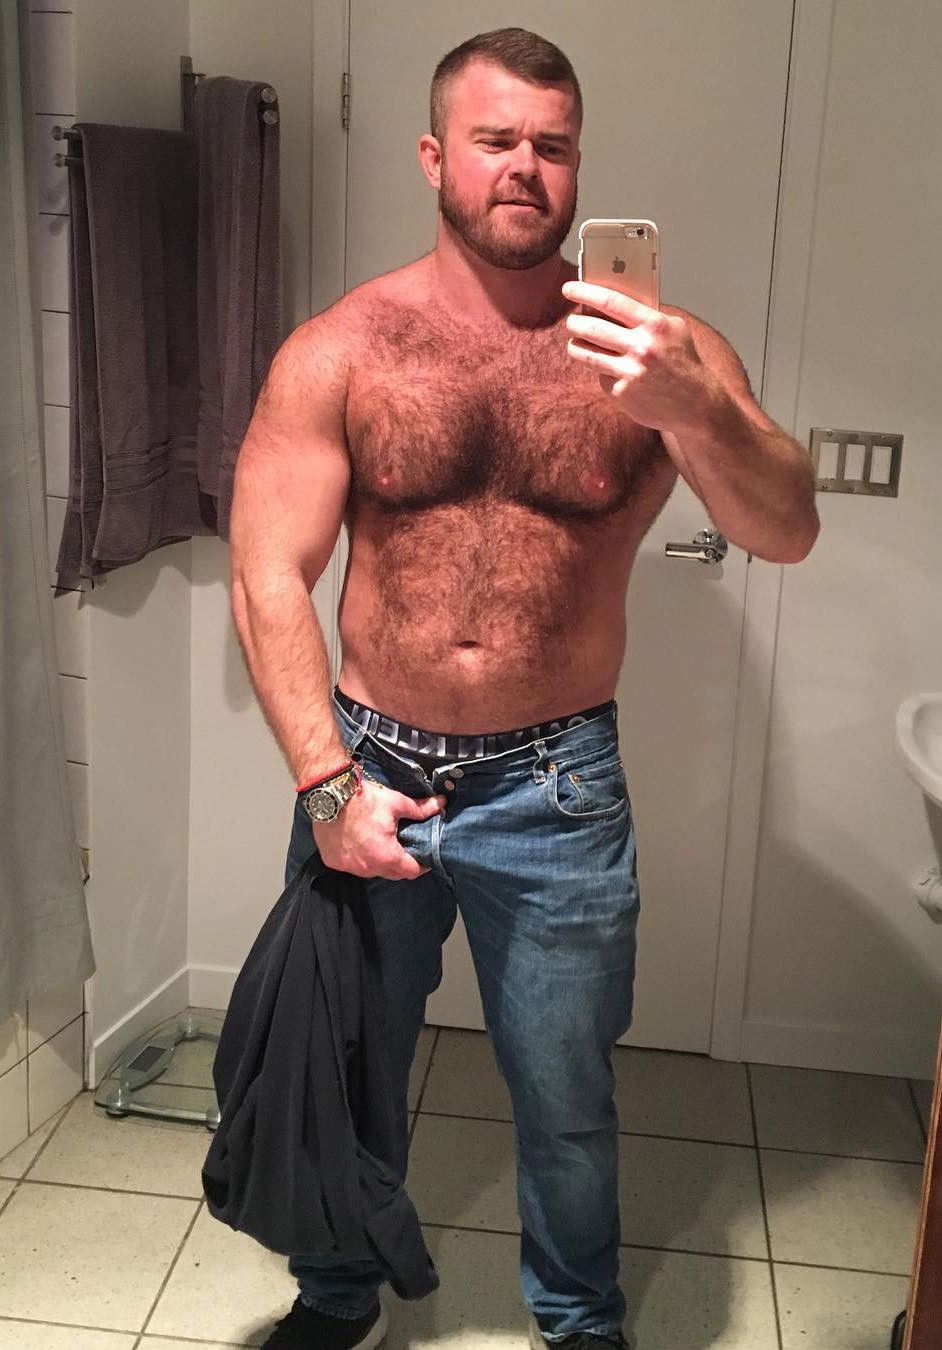 Photo by Smitty with the username @Resol702,  December 13, 2019 at 6:14 PM. The post is about the topic Gay Hairy Men